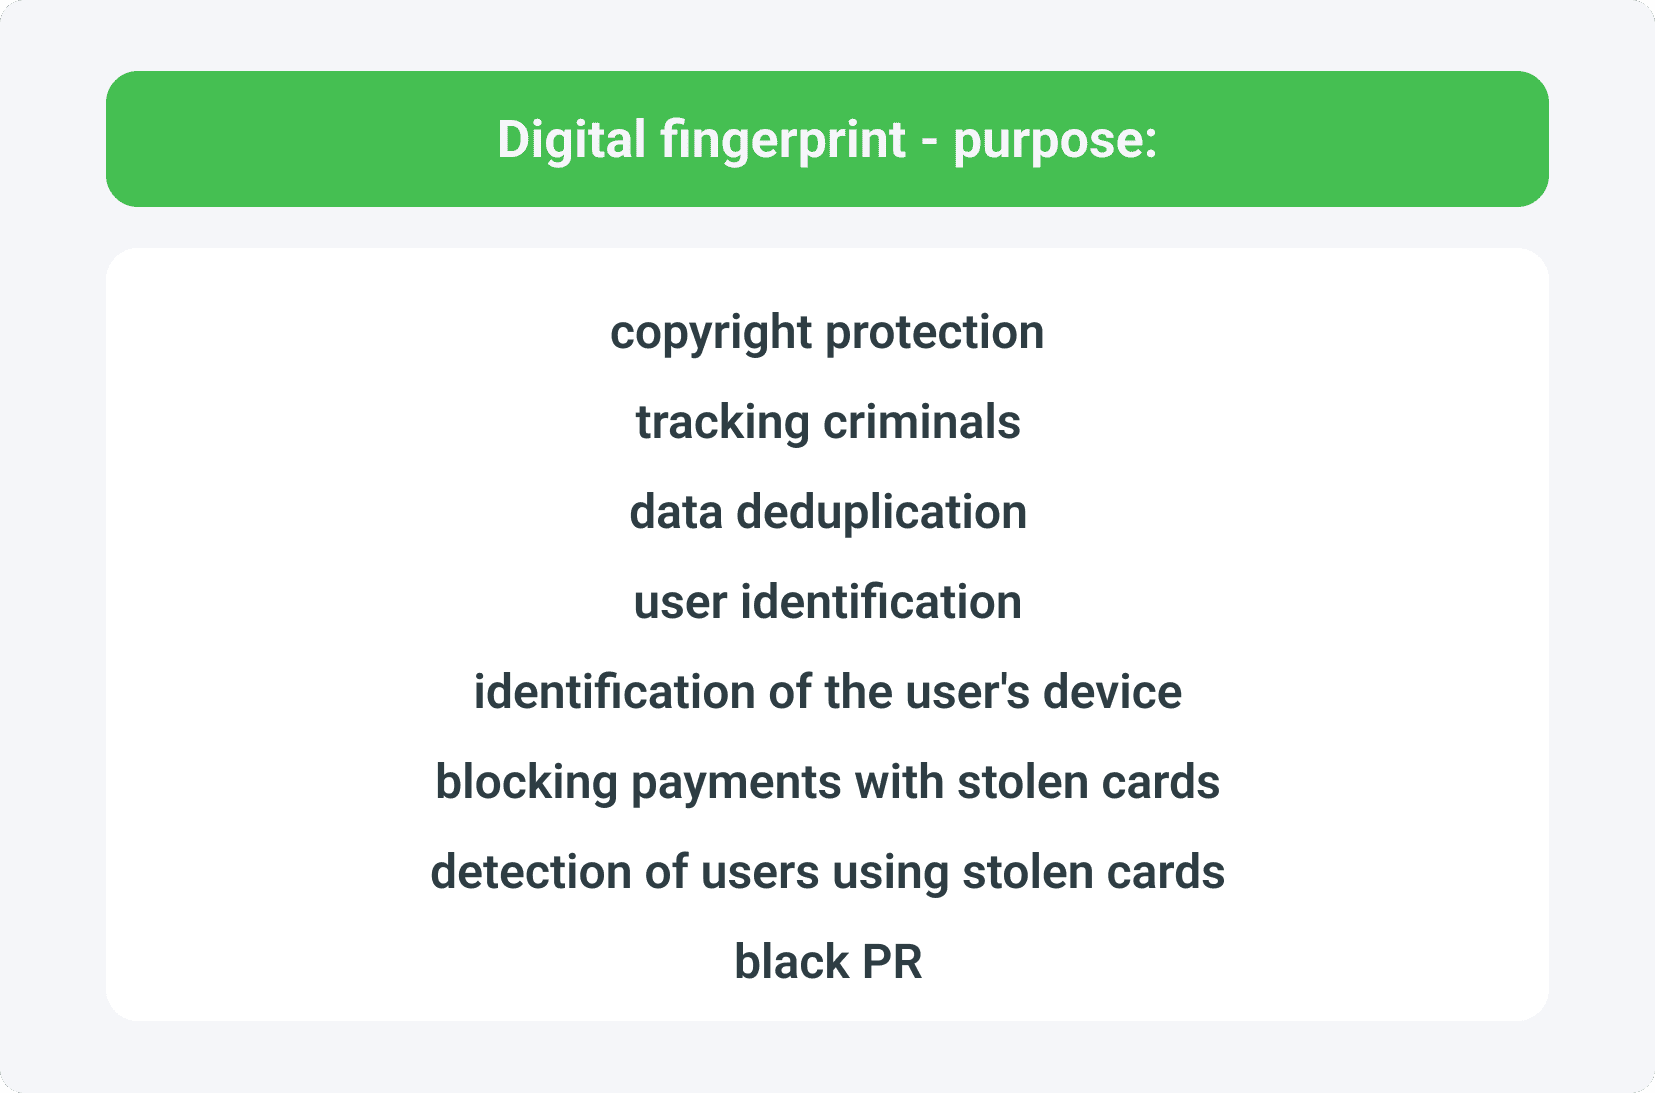 Digital fingerprint is used for many actions | Online anonymity